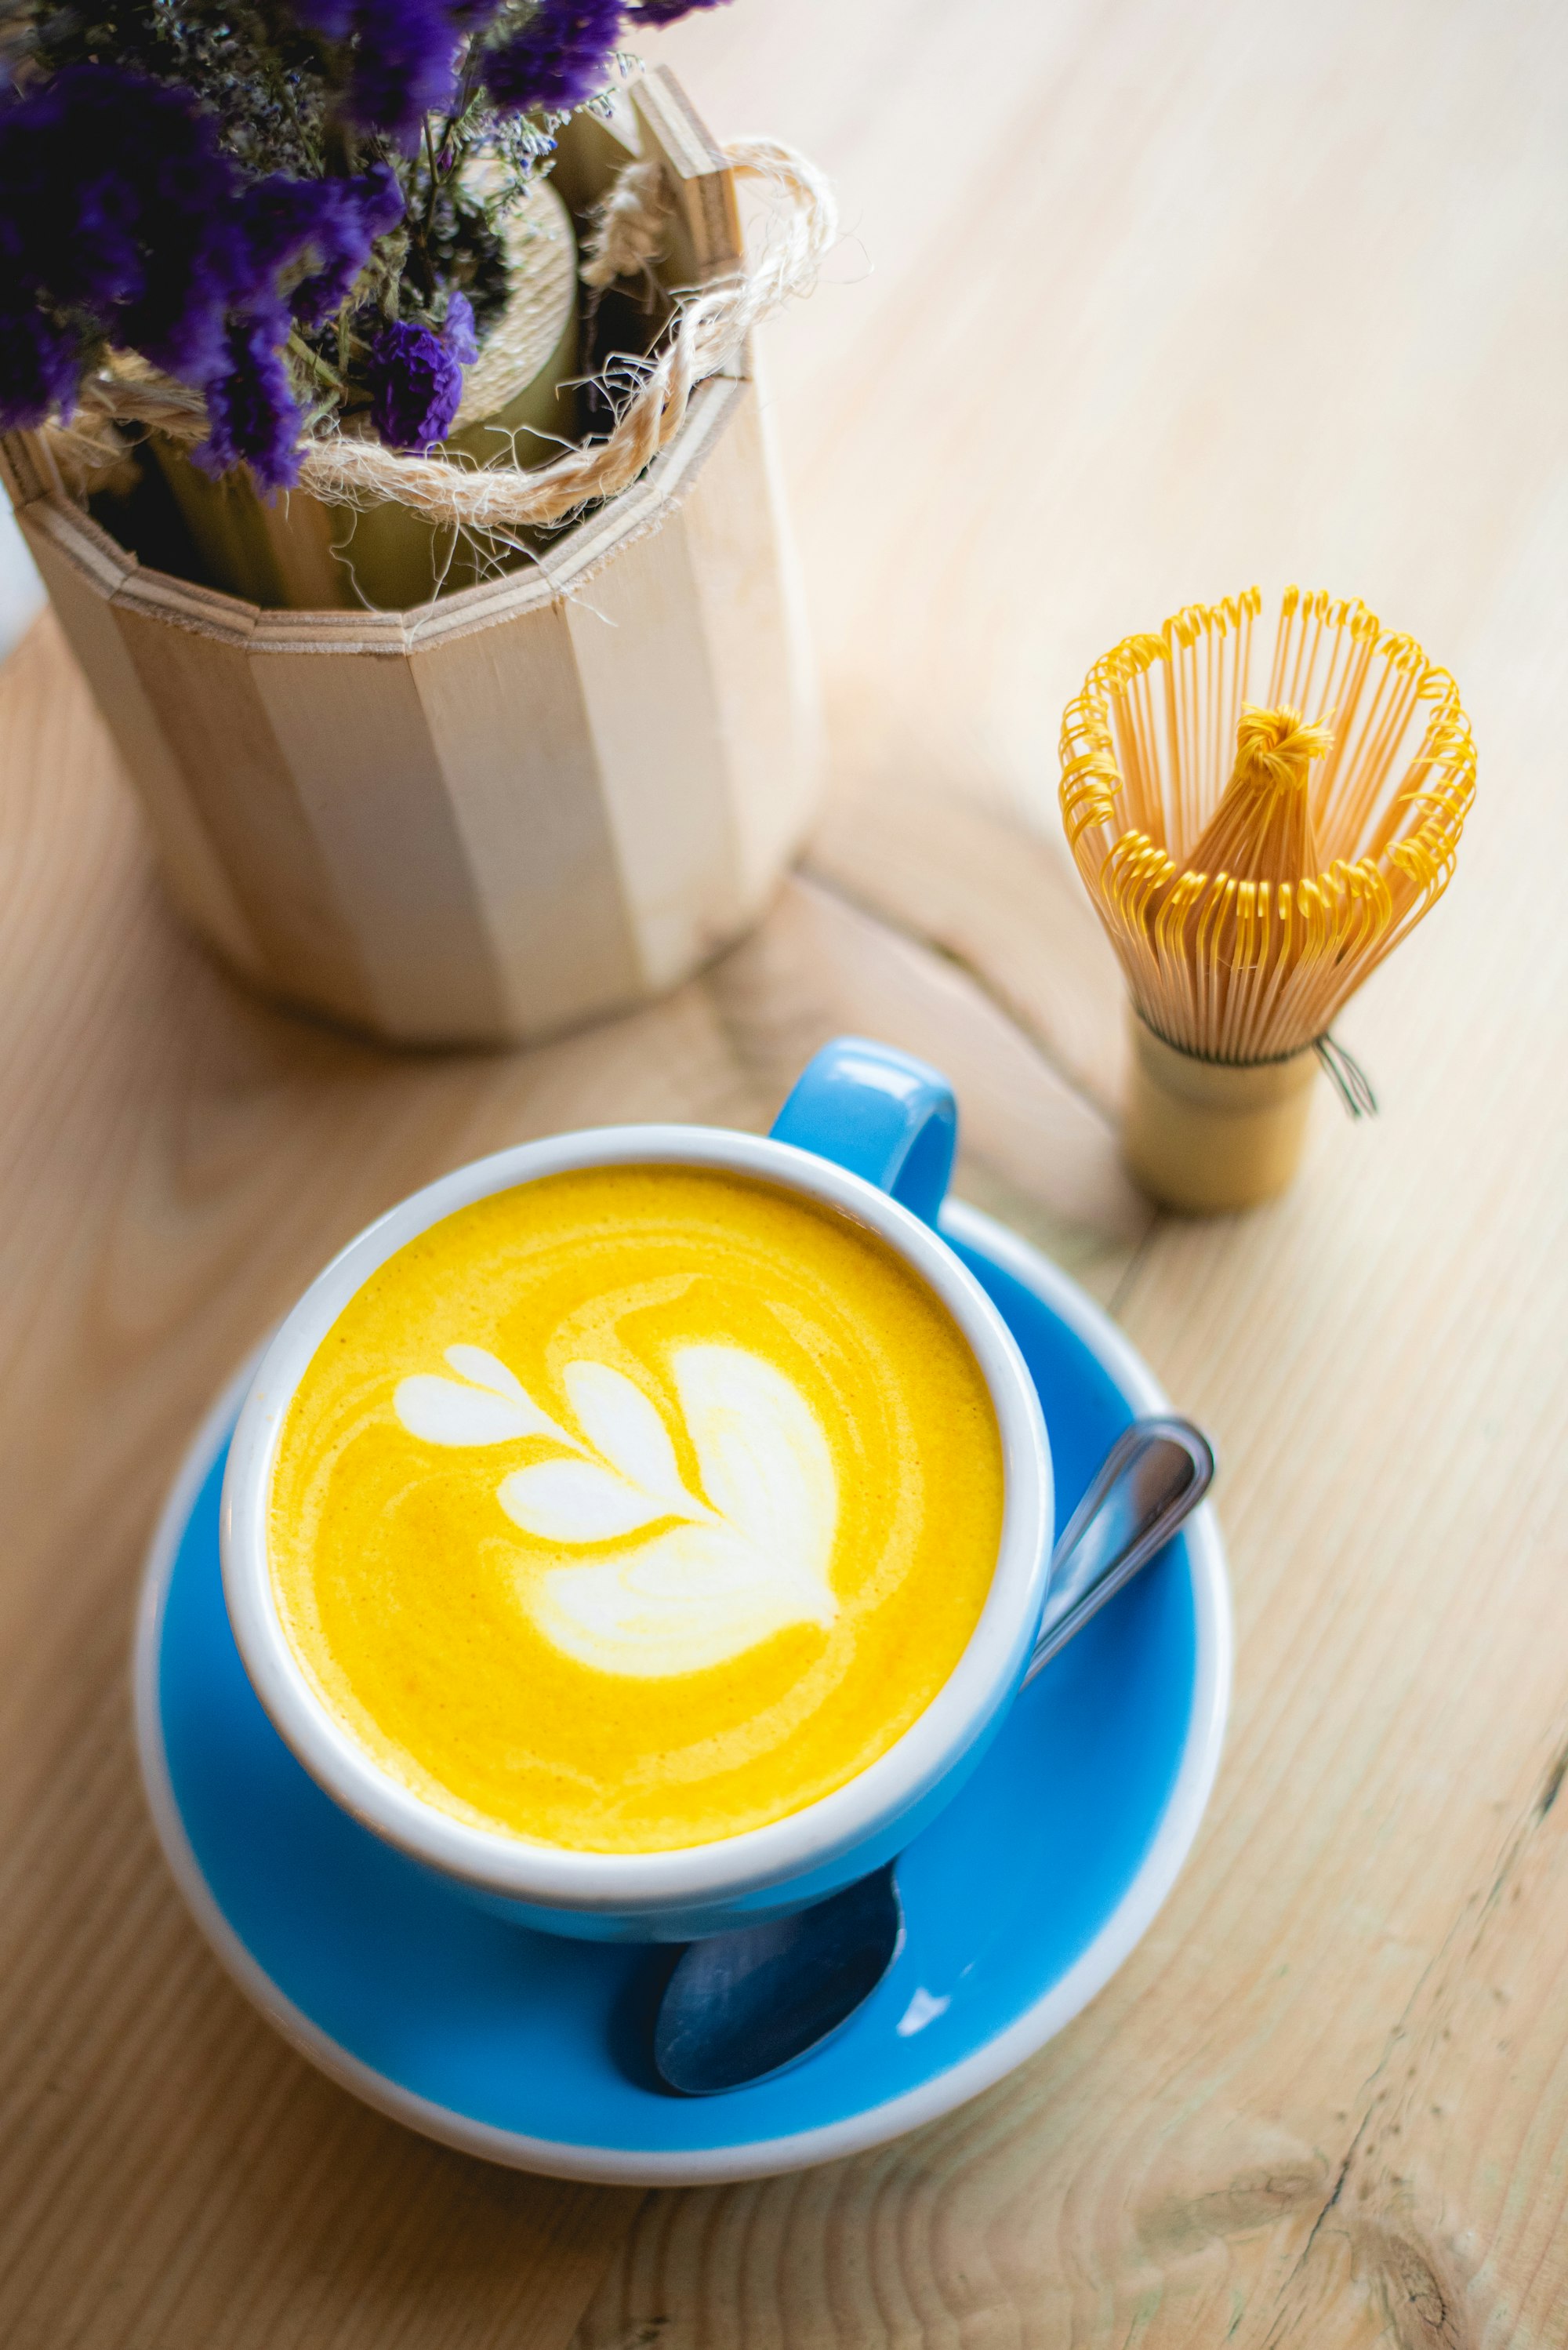 A turmeric latte at a coffee shop